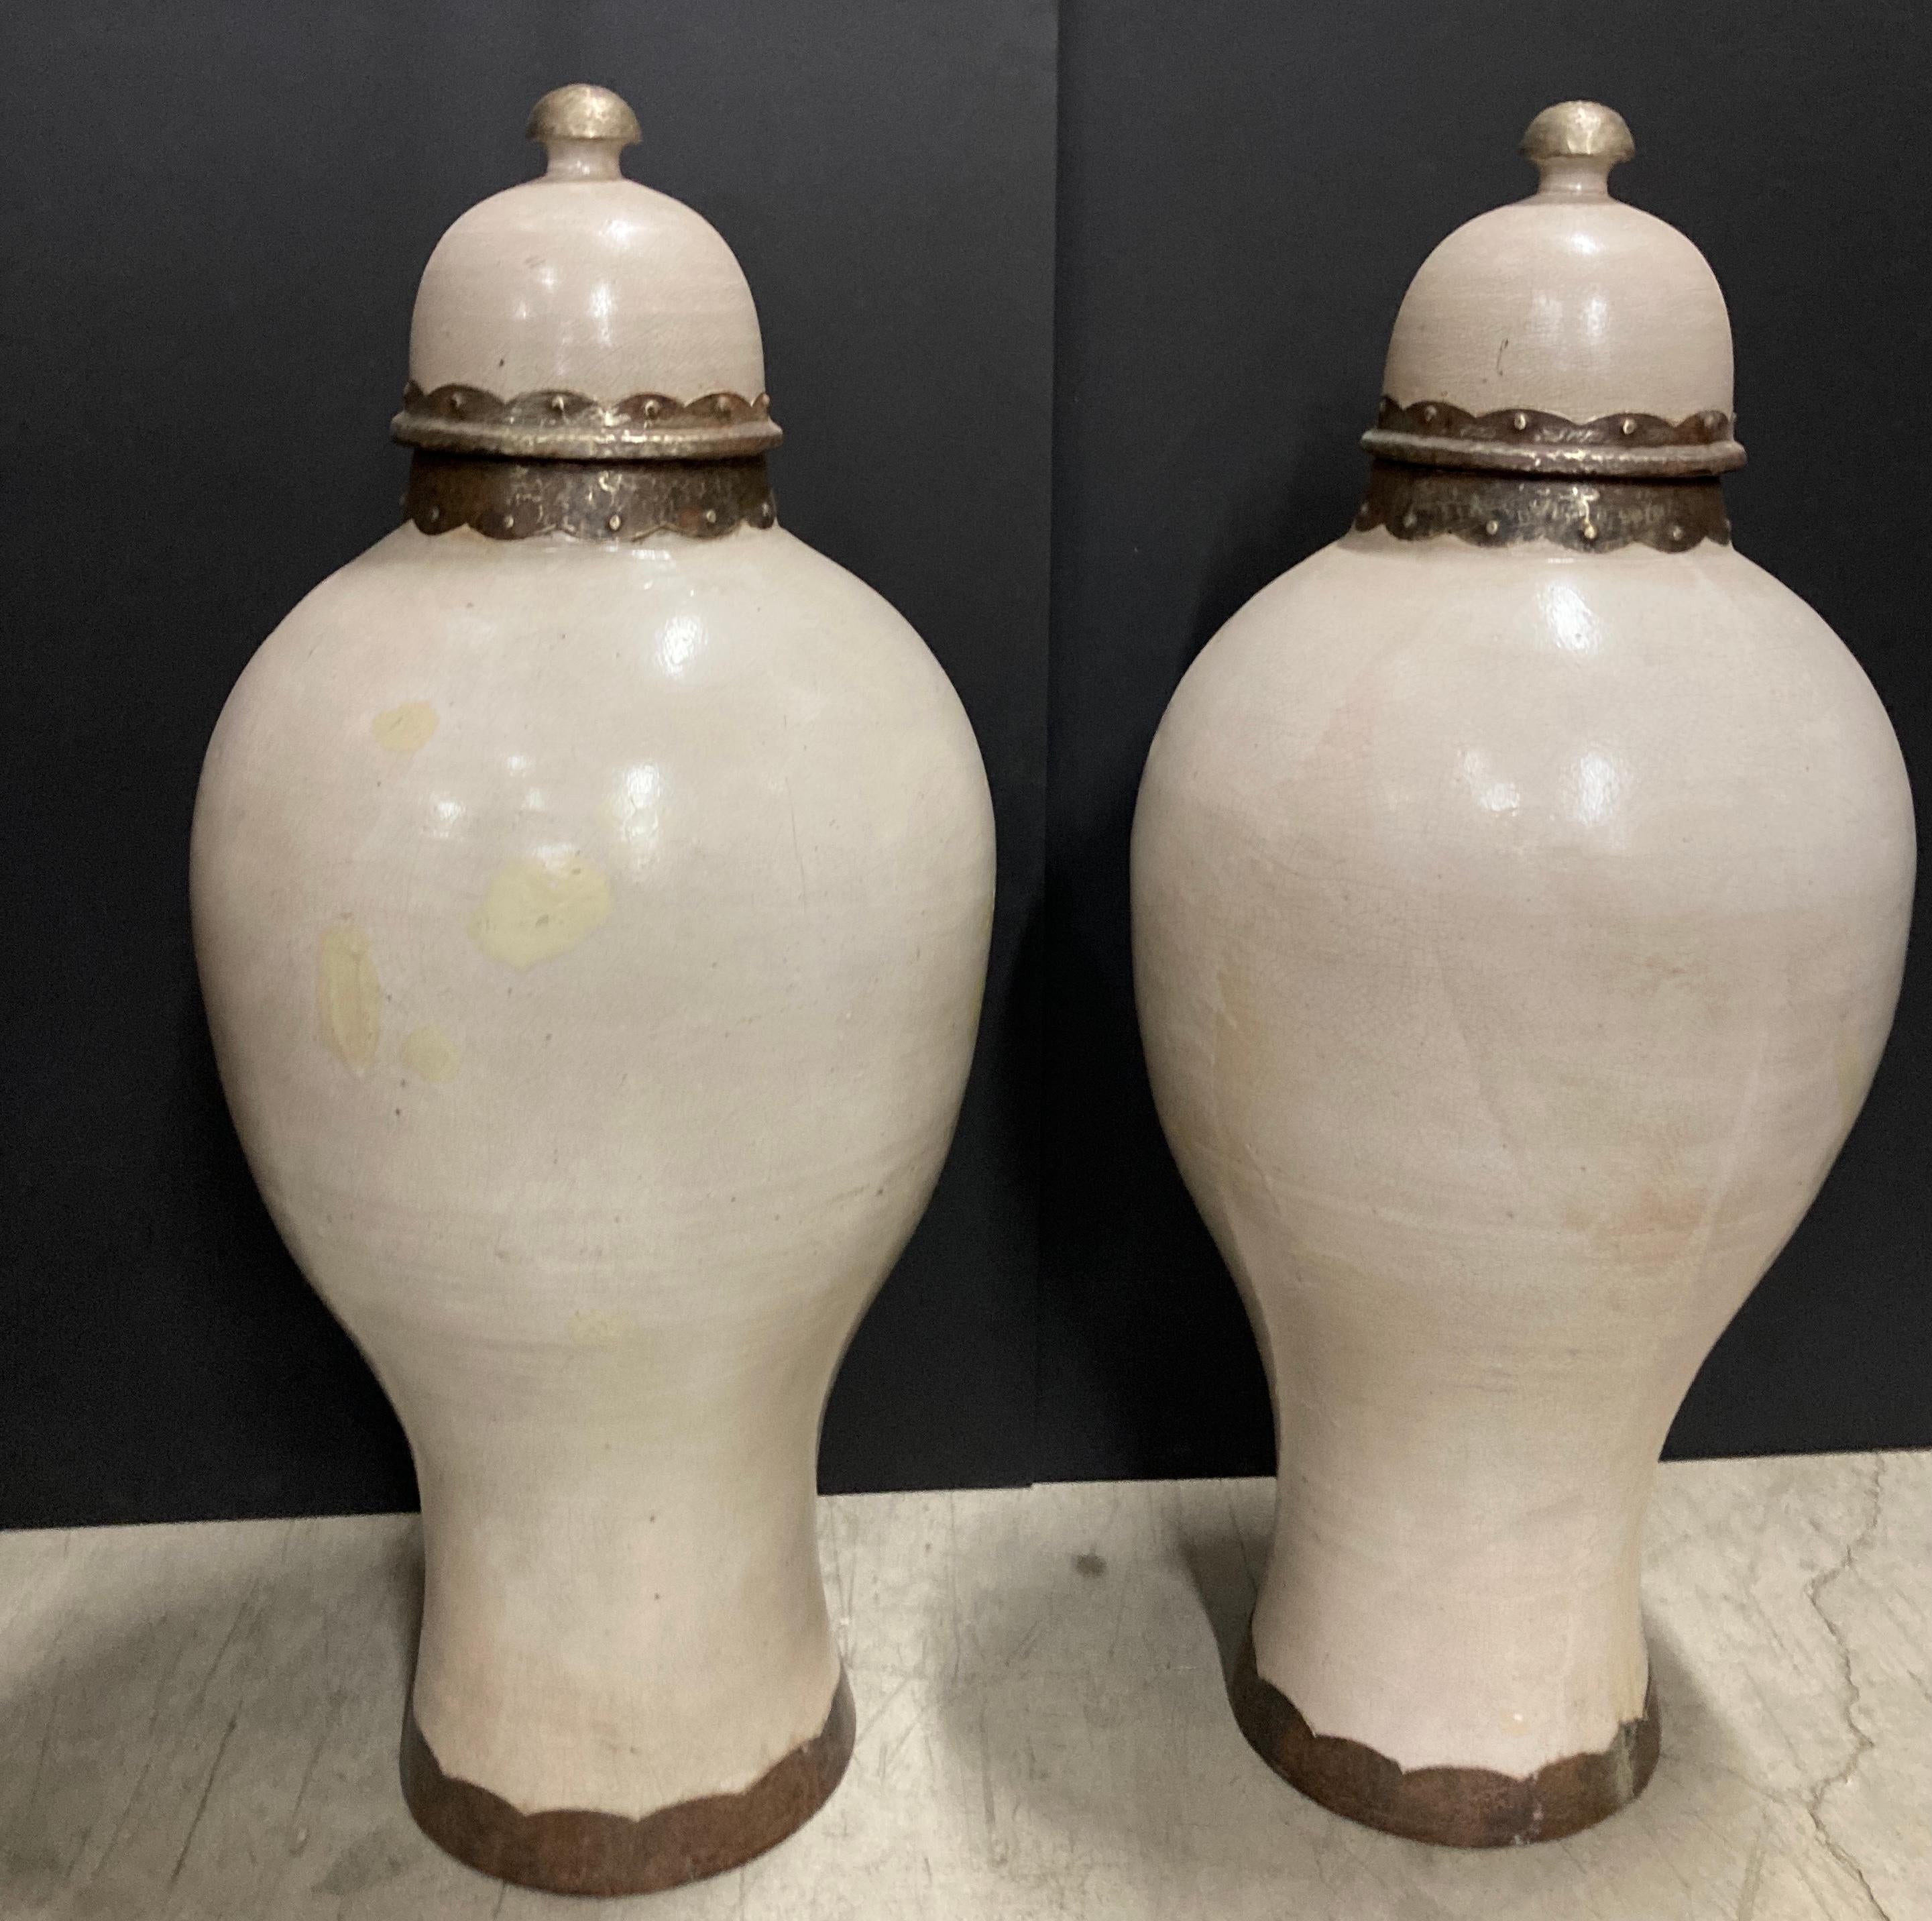 Pair of large Moorish olive jars with lid, handcrafted in Morocco, ivory color, measures: 41